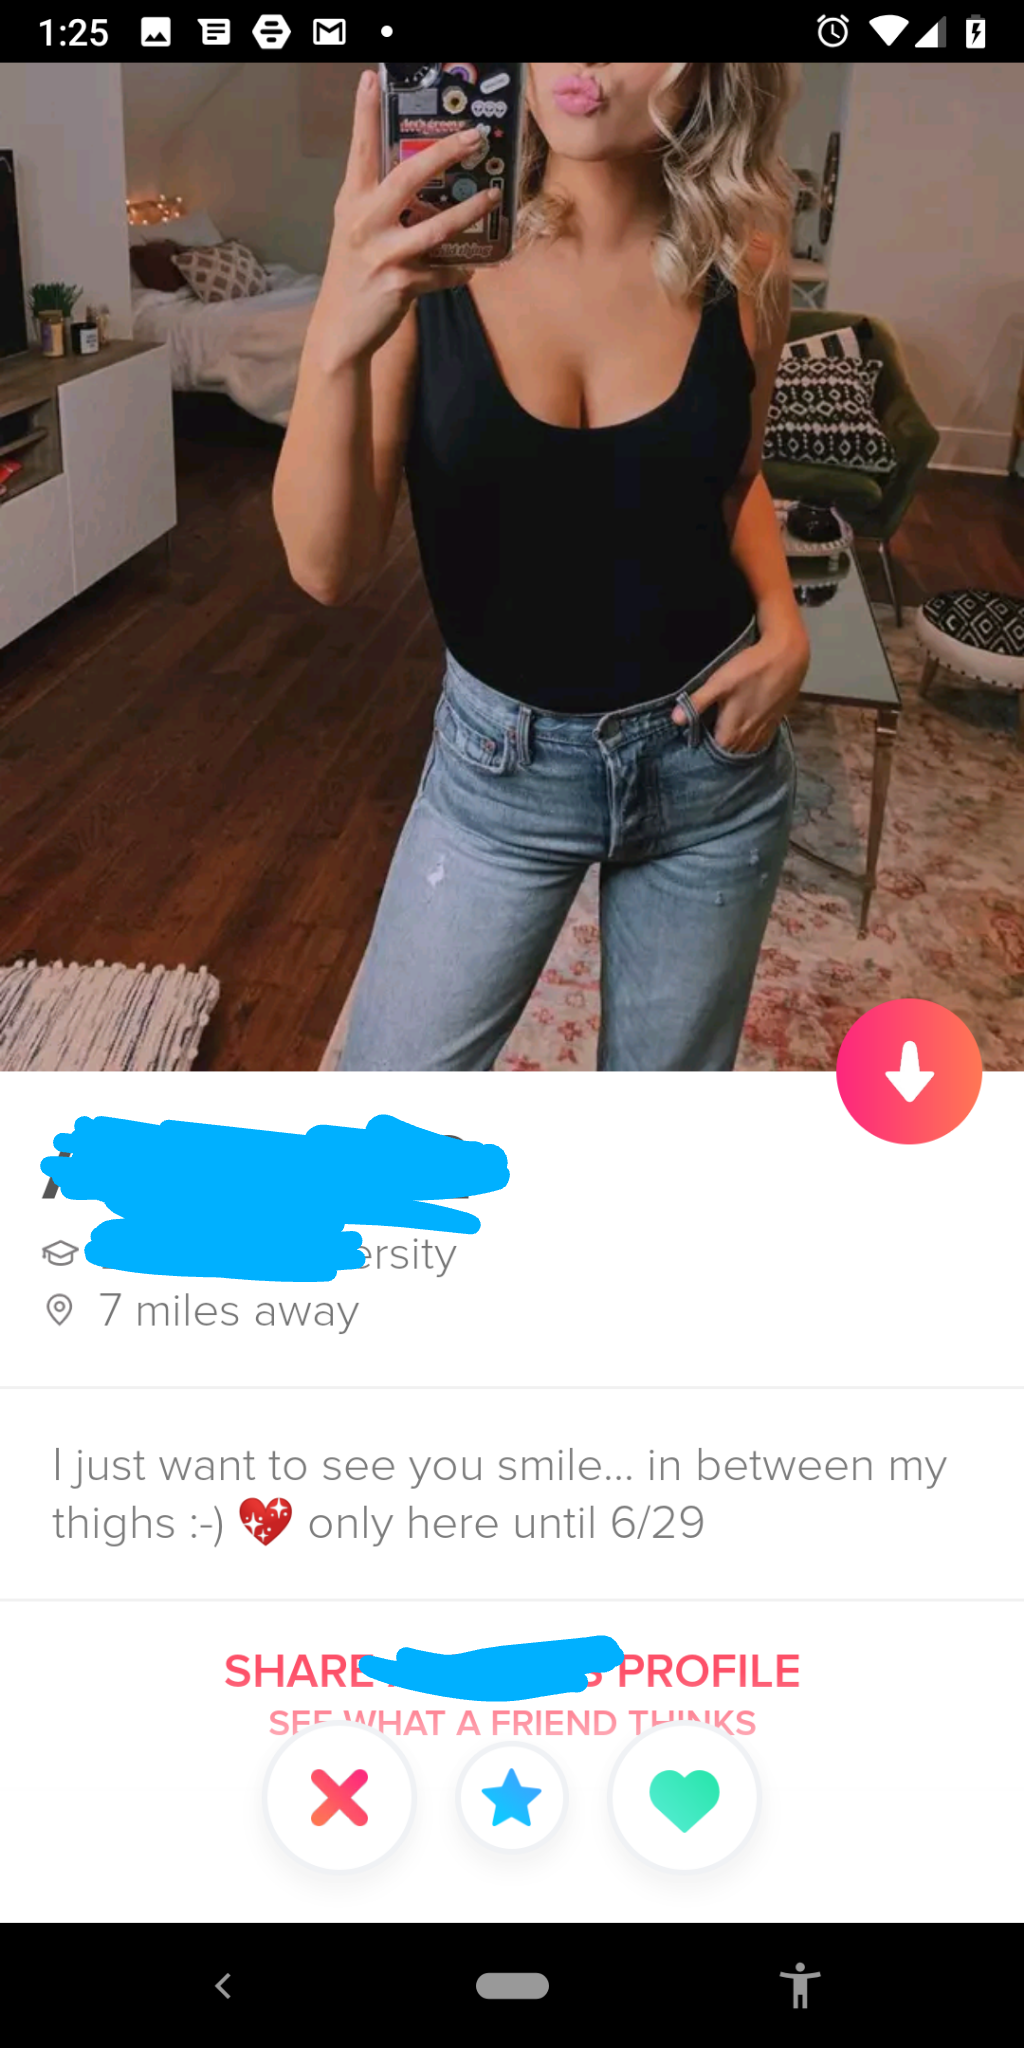 tinder wins and fails -just want to see you smile. In between my thighs only here until